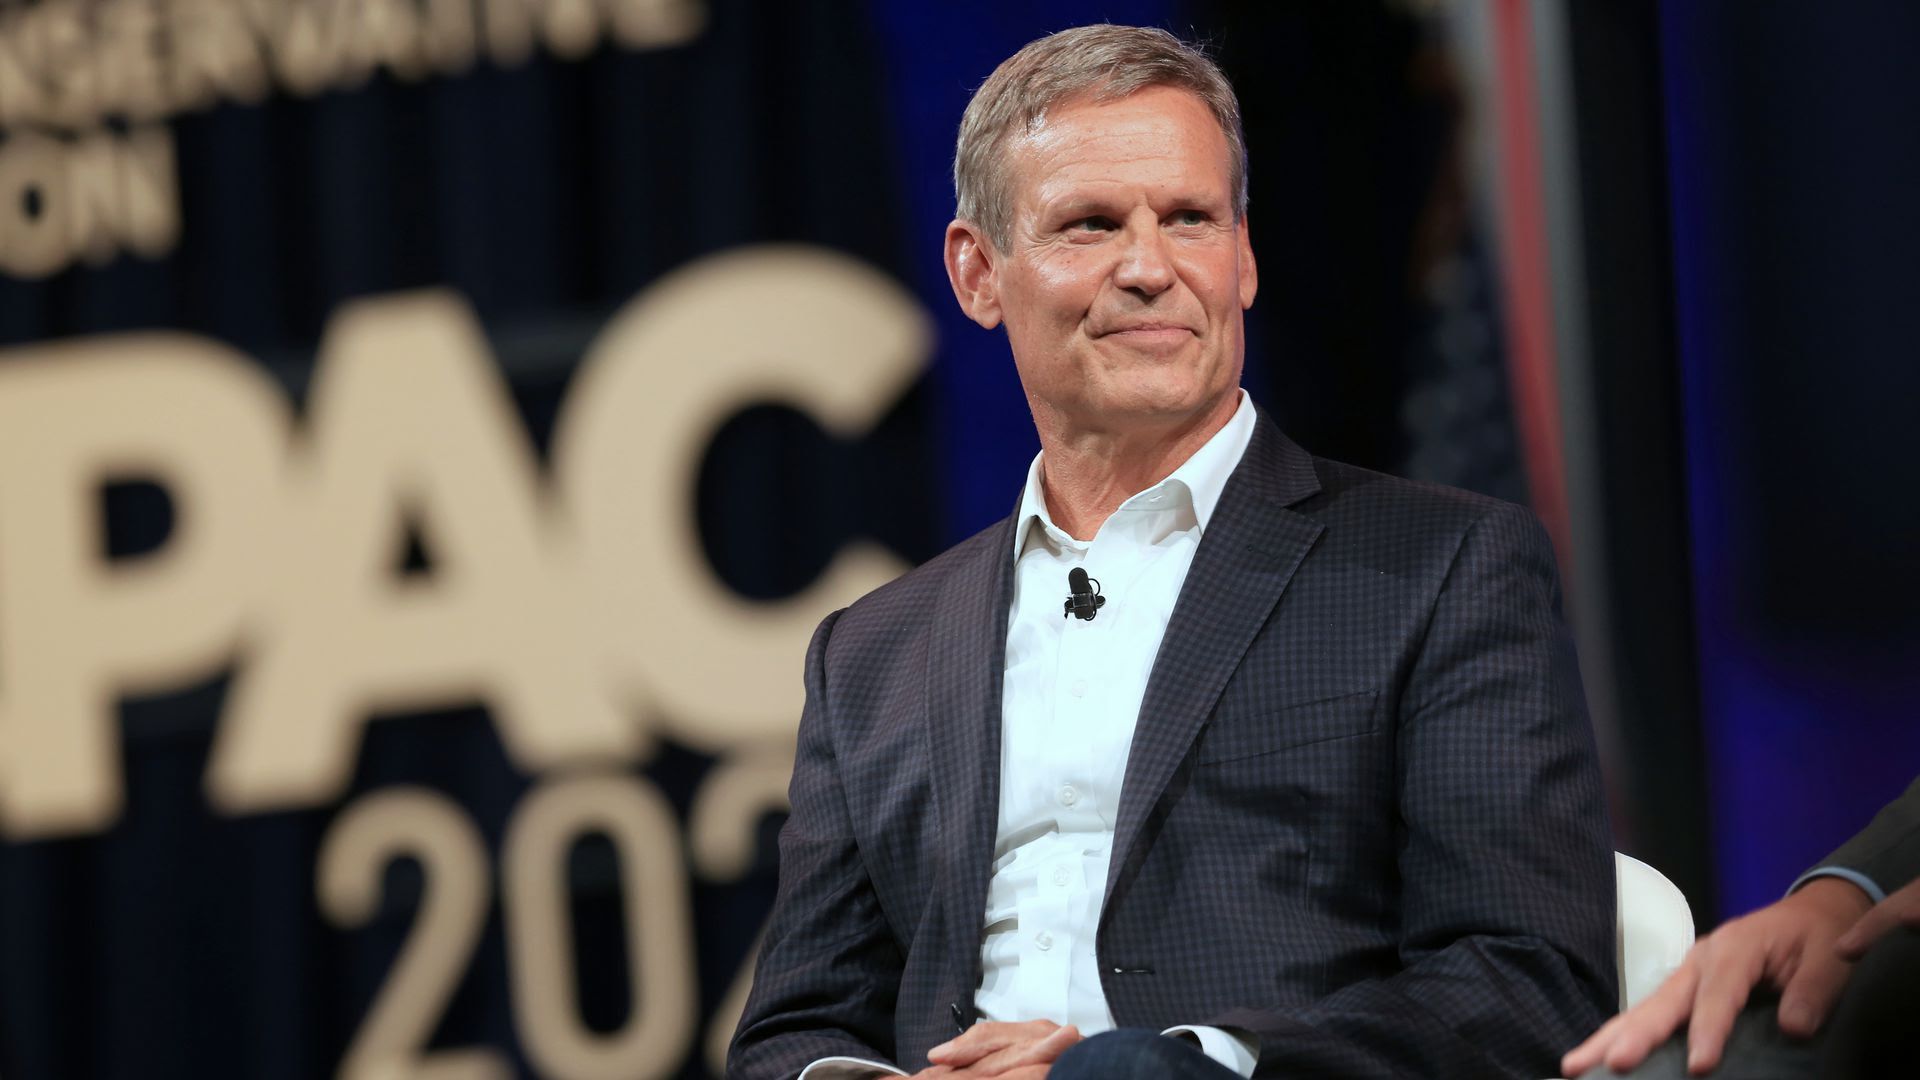 Gov. Bill Lee at an event in July wearing a black suit jacket and no tie 